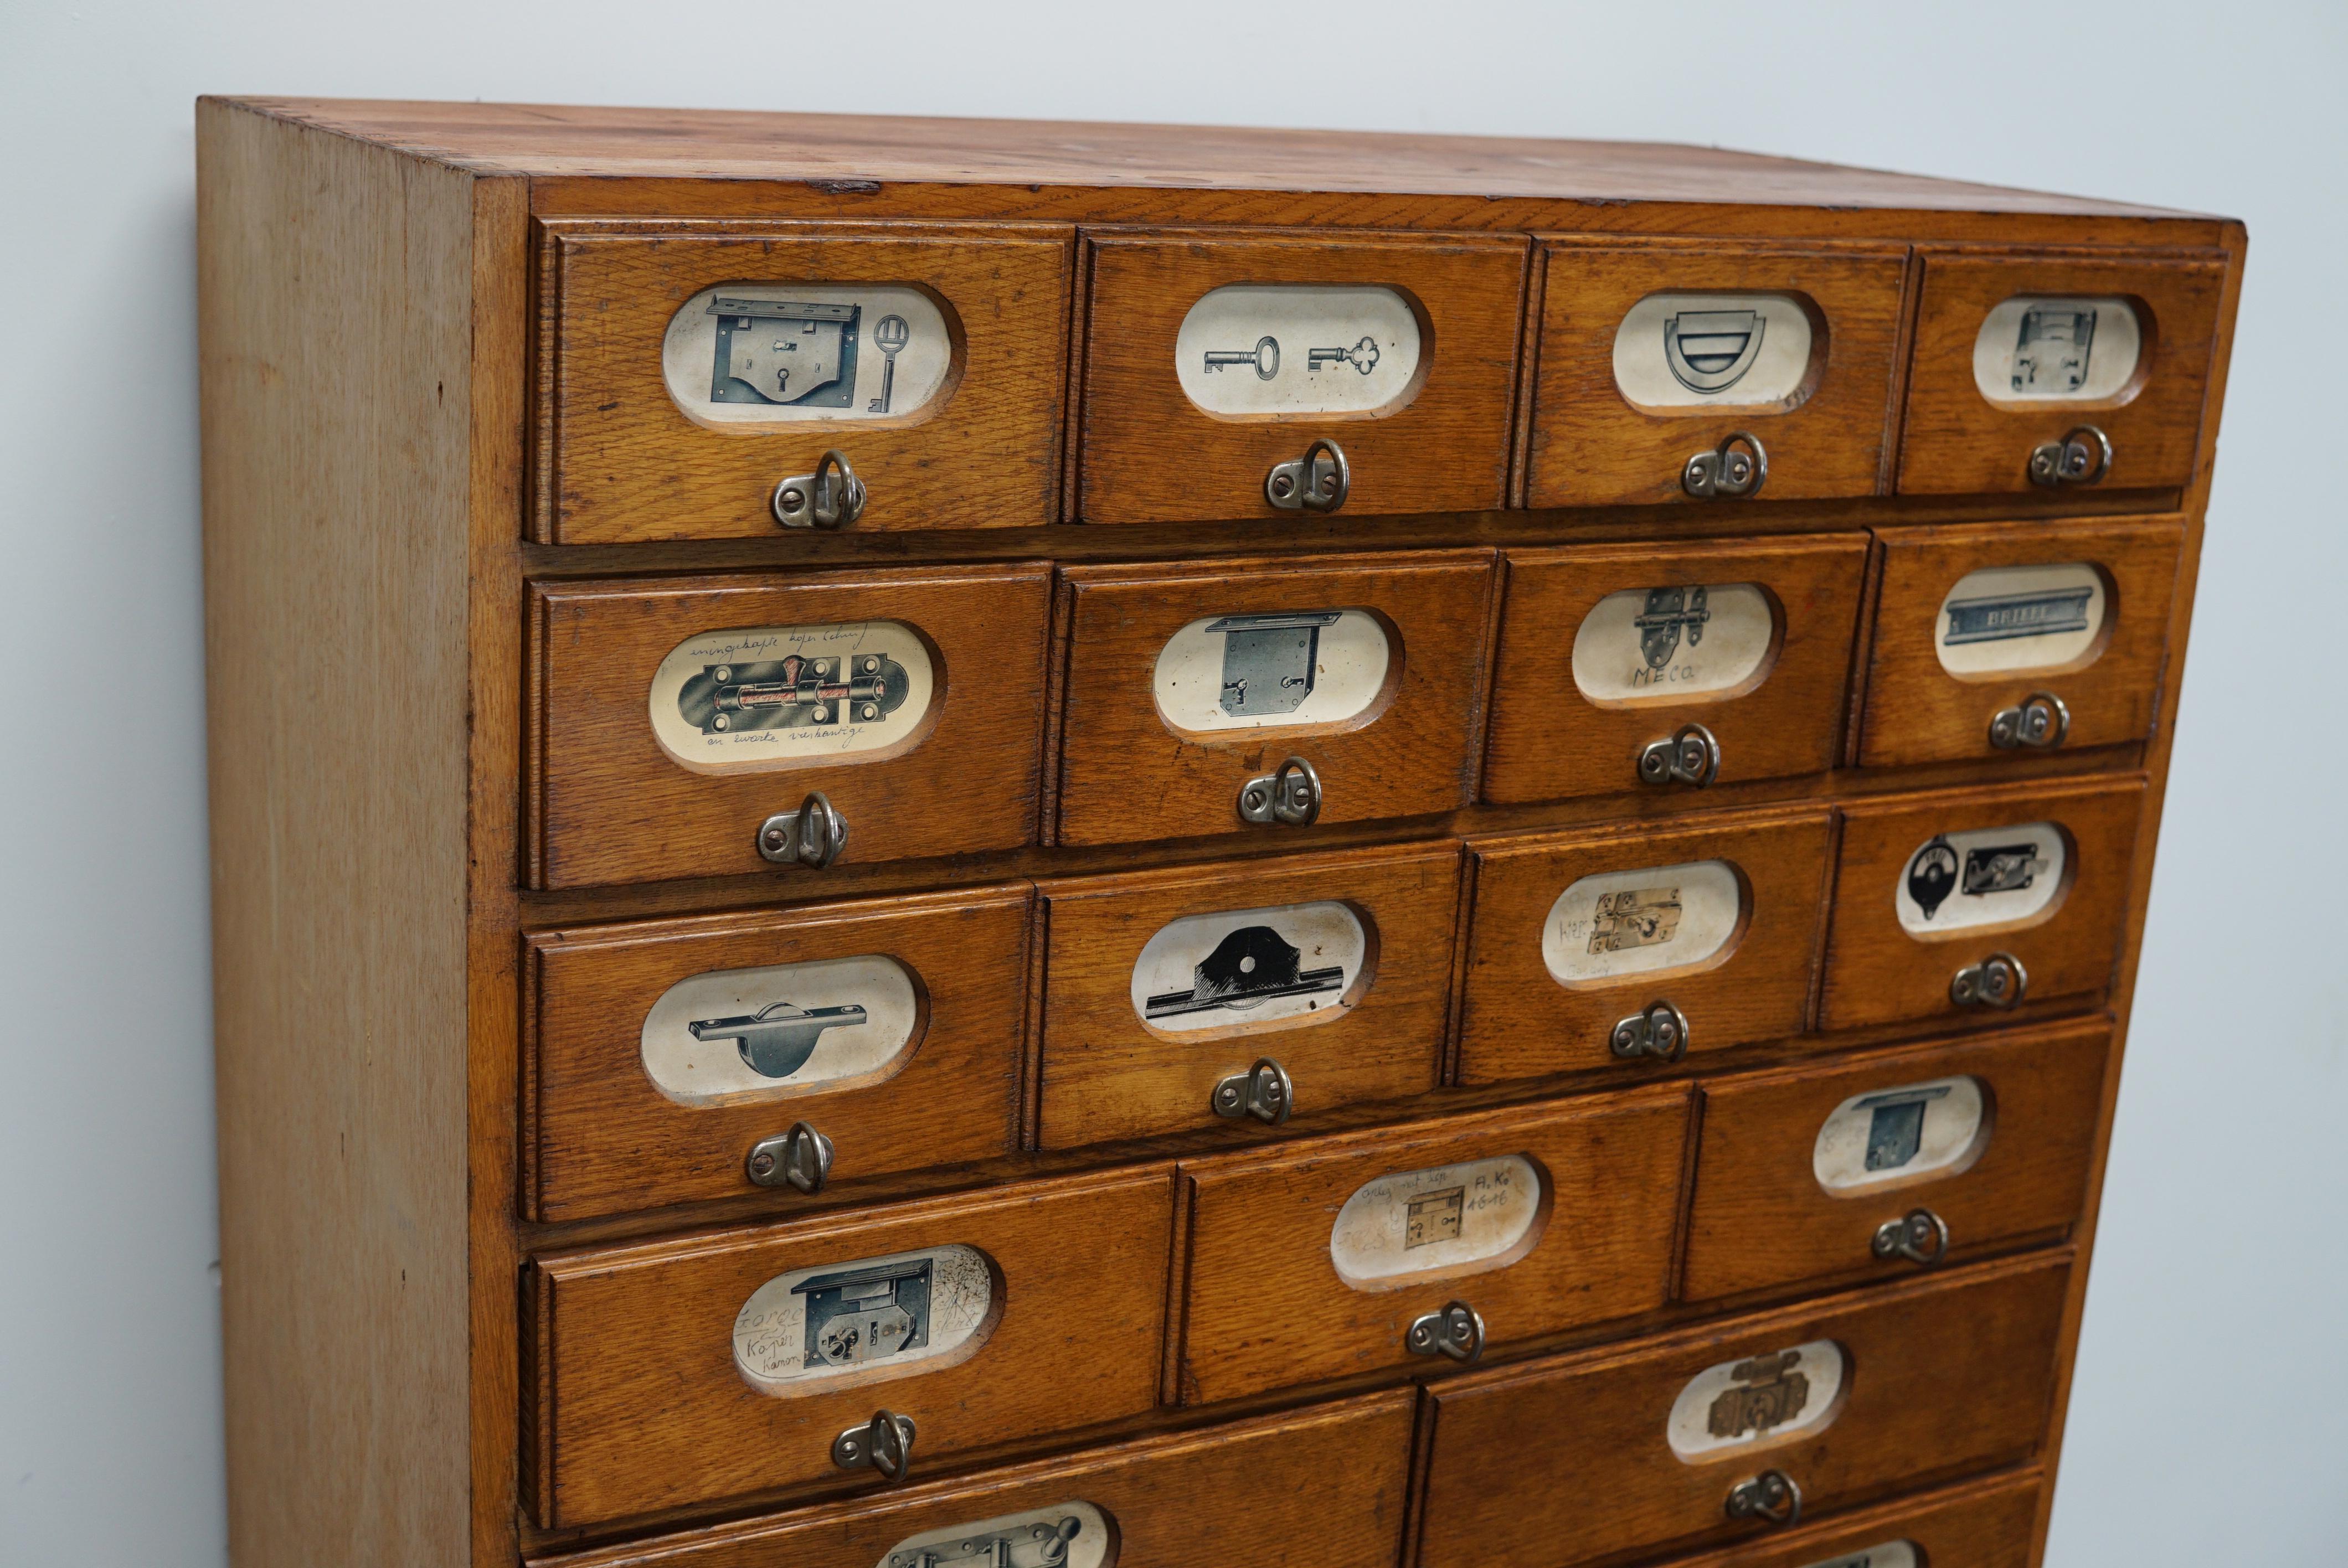 This apothecary cabinet was made circa 1940s in Germany and was later used in a hardware store in Belgium until recently. It features many drawers in different sizes with metal handles and the labels of the contents.